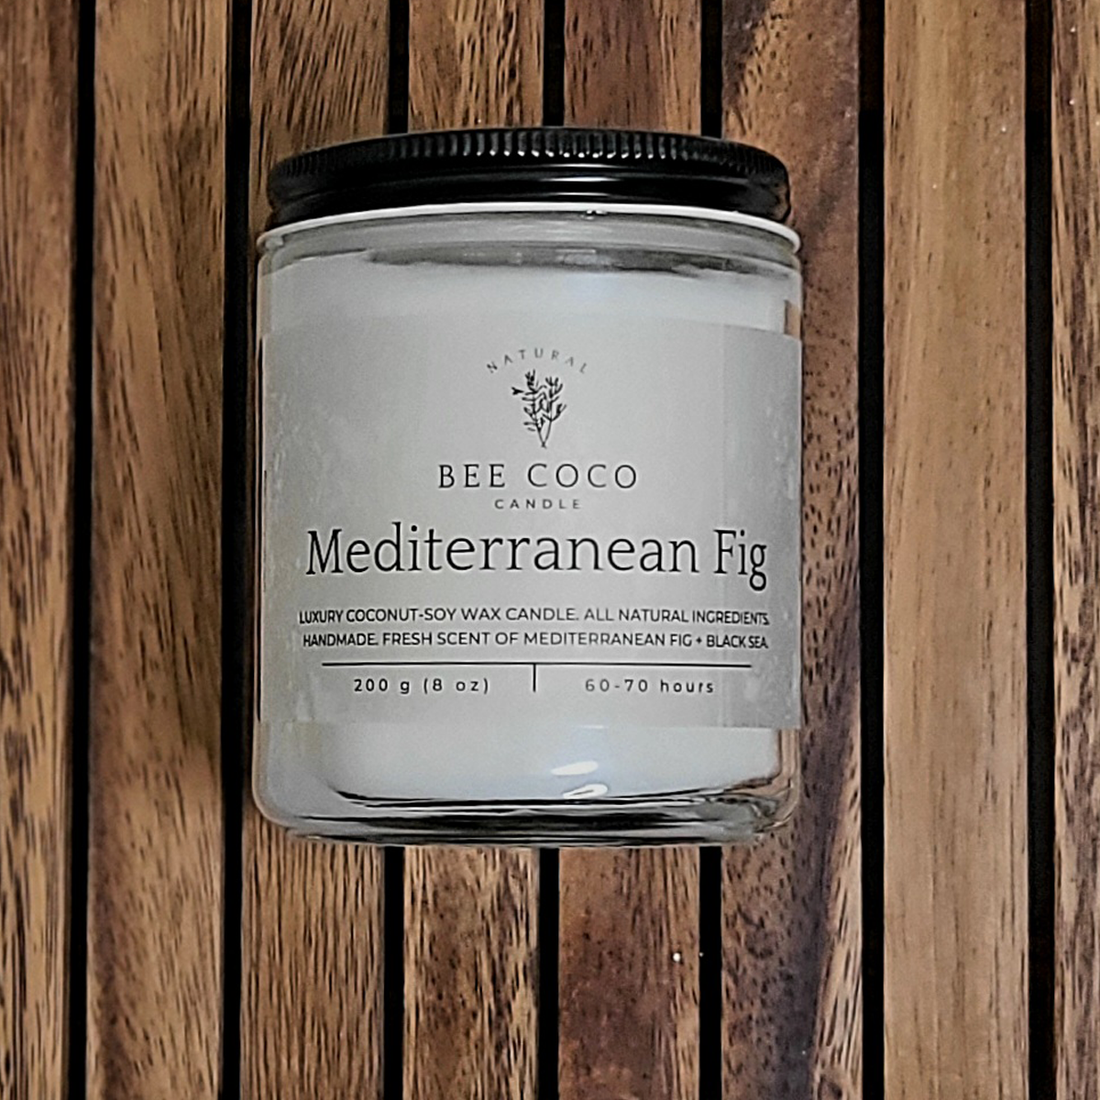 Bee Coco Candle Mediterranean Fig 8 oz Scented Candle